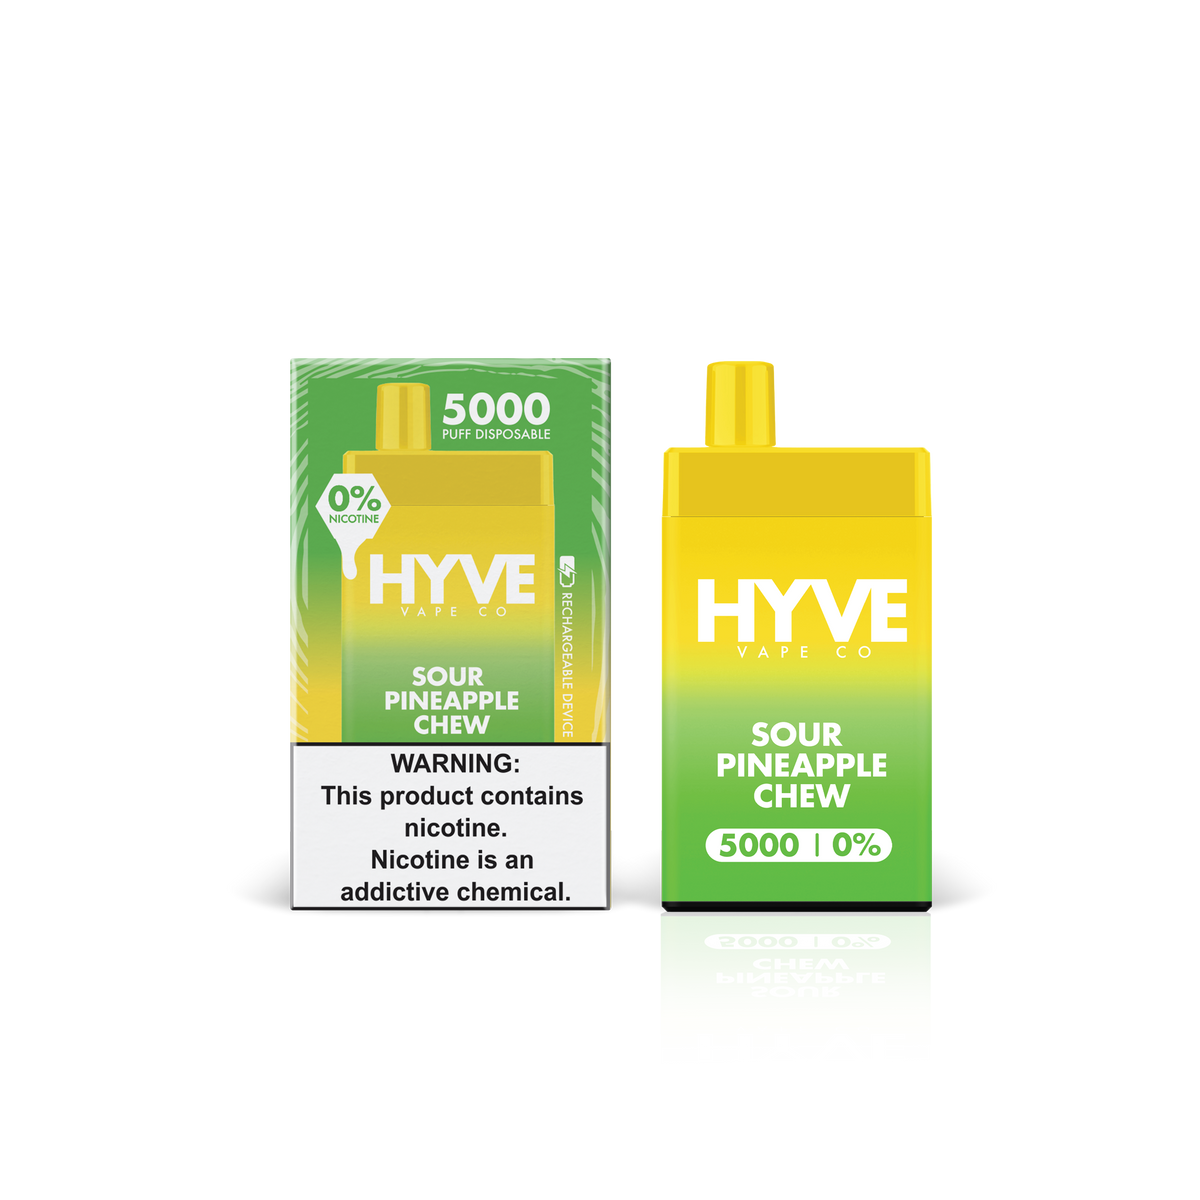 Sour Pineapple Chew by Hyve Disposable 5K 0%